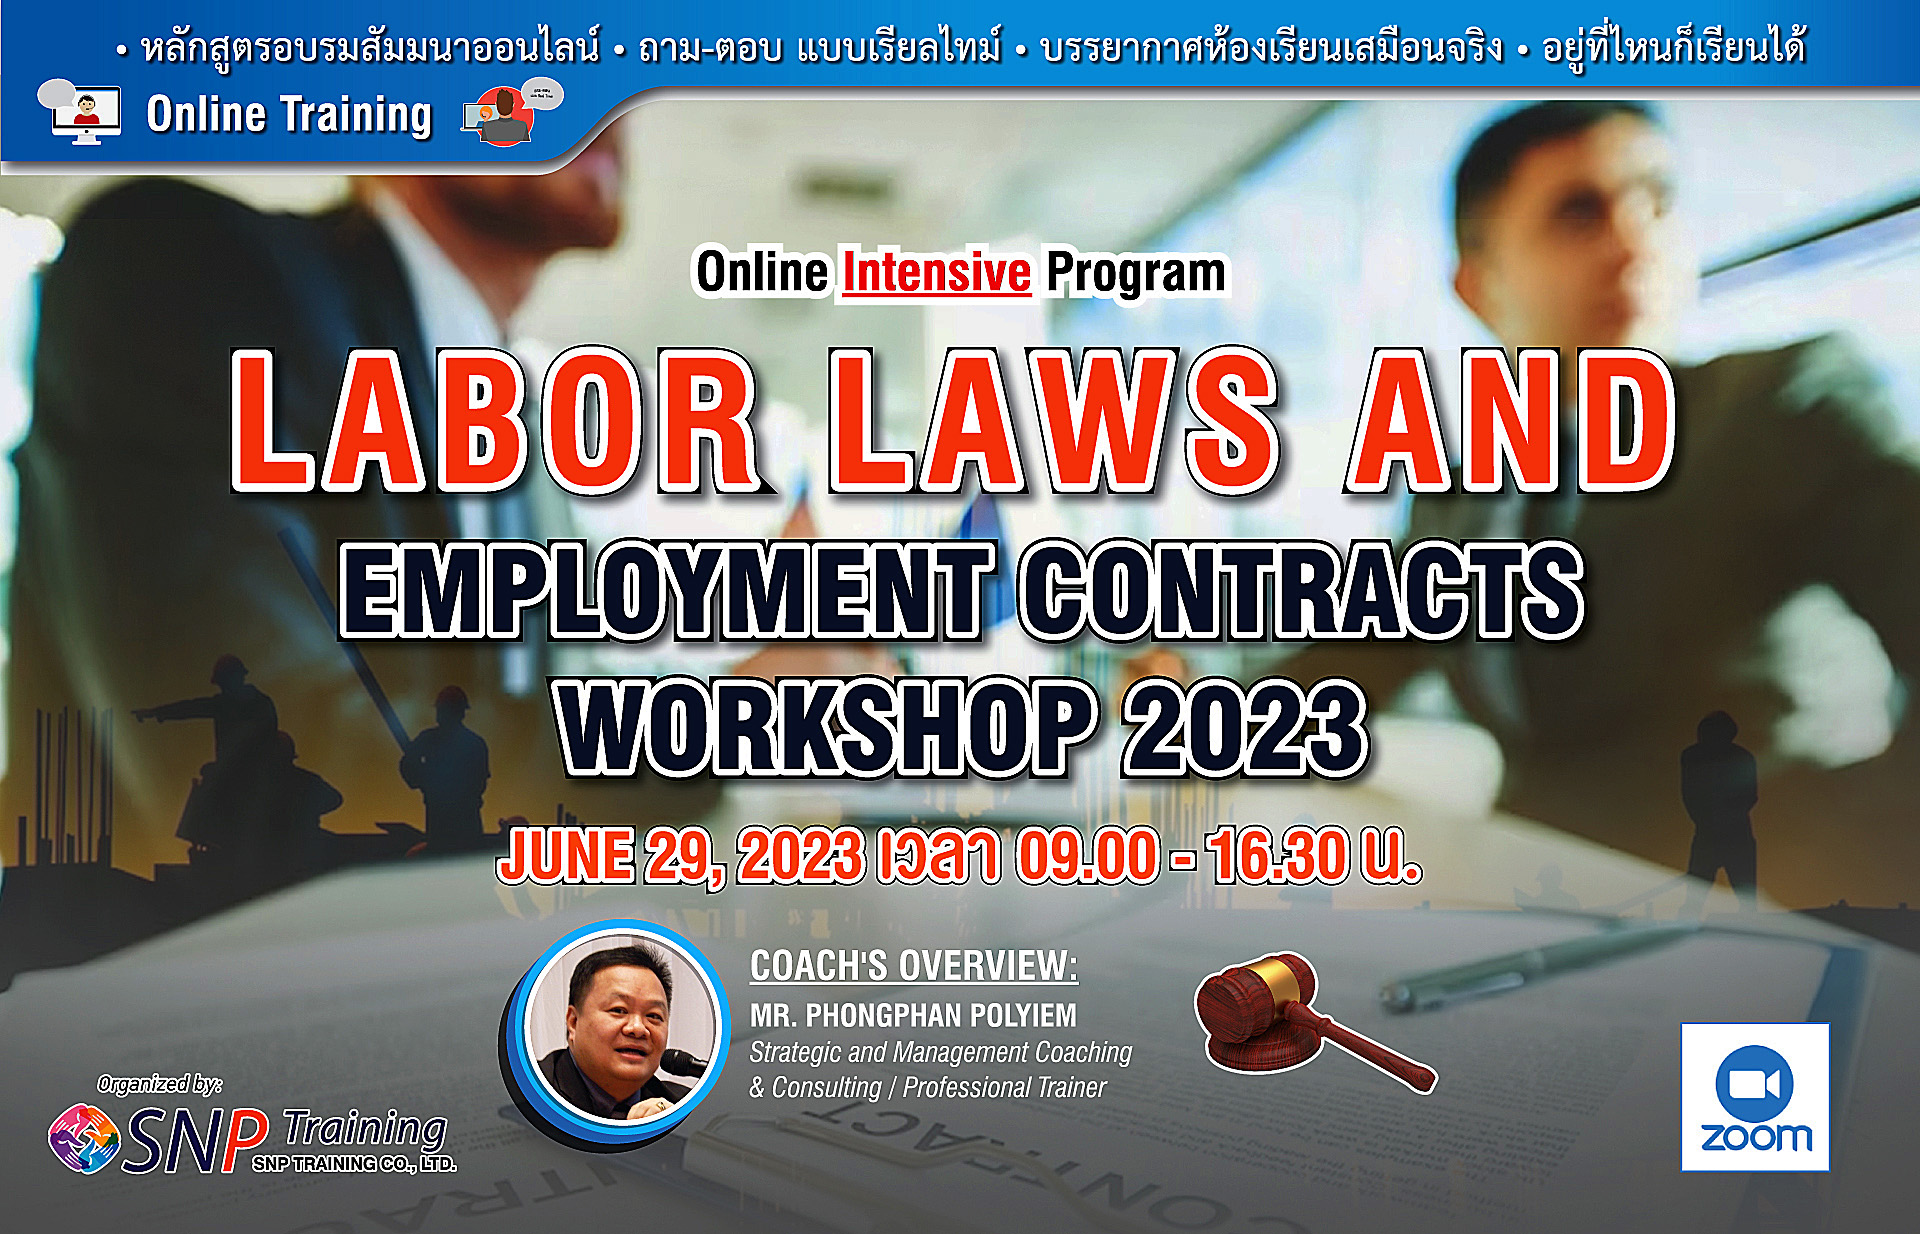 Labor Laws And Employment Contracts Workshop 2023